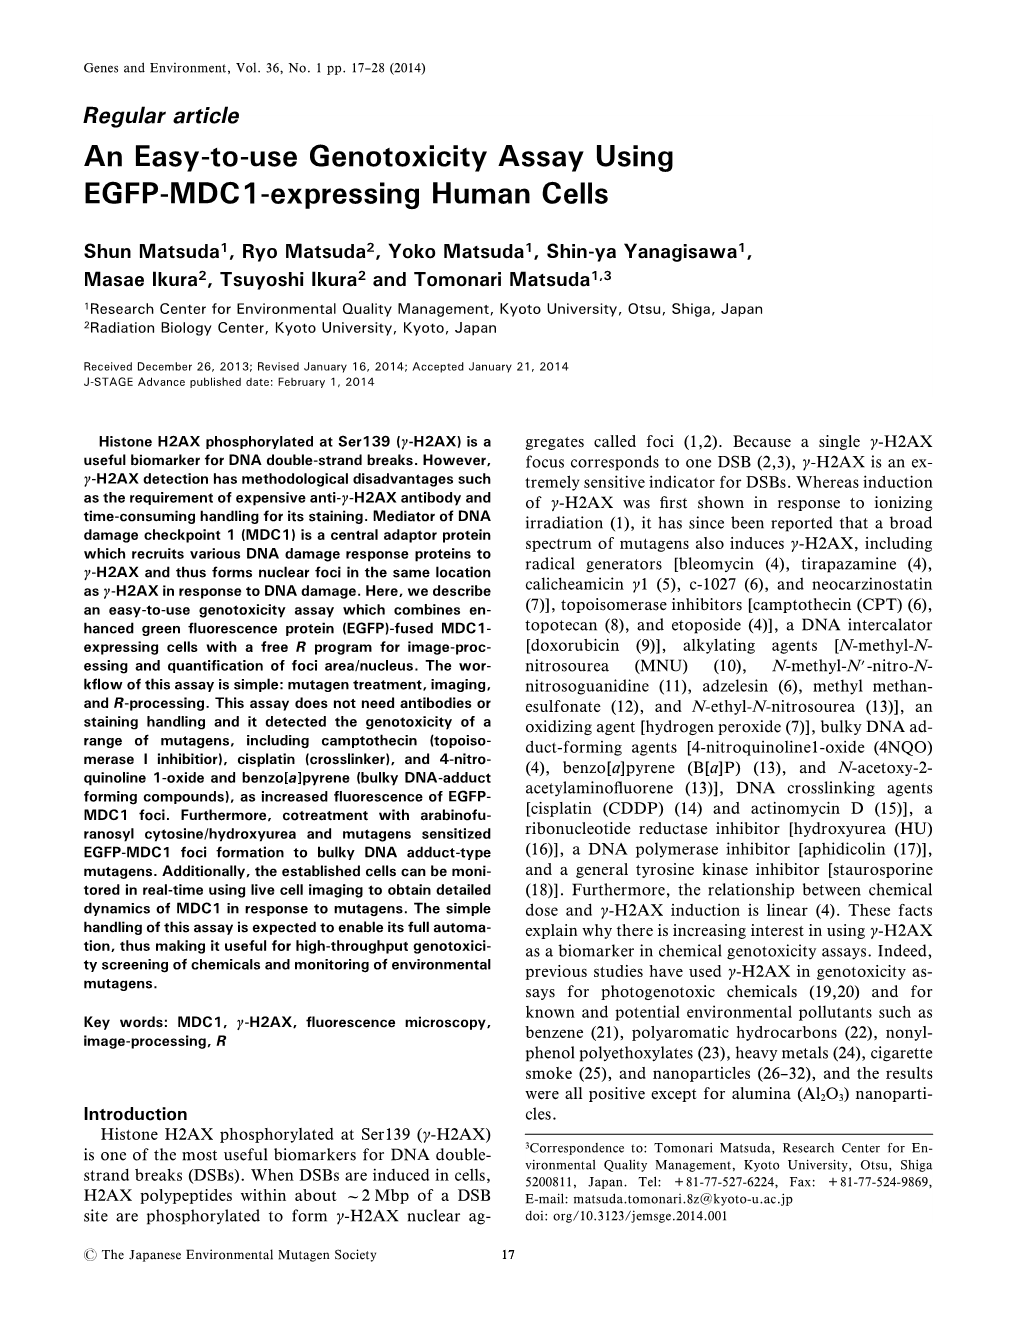 An Easy-To-Use Genotoxicity Assay Using EGFP-MDC1-Expressing Human Cells